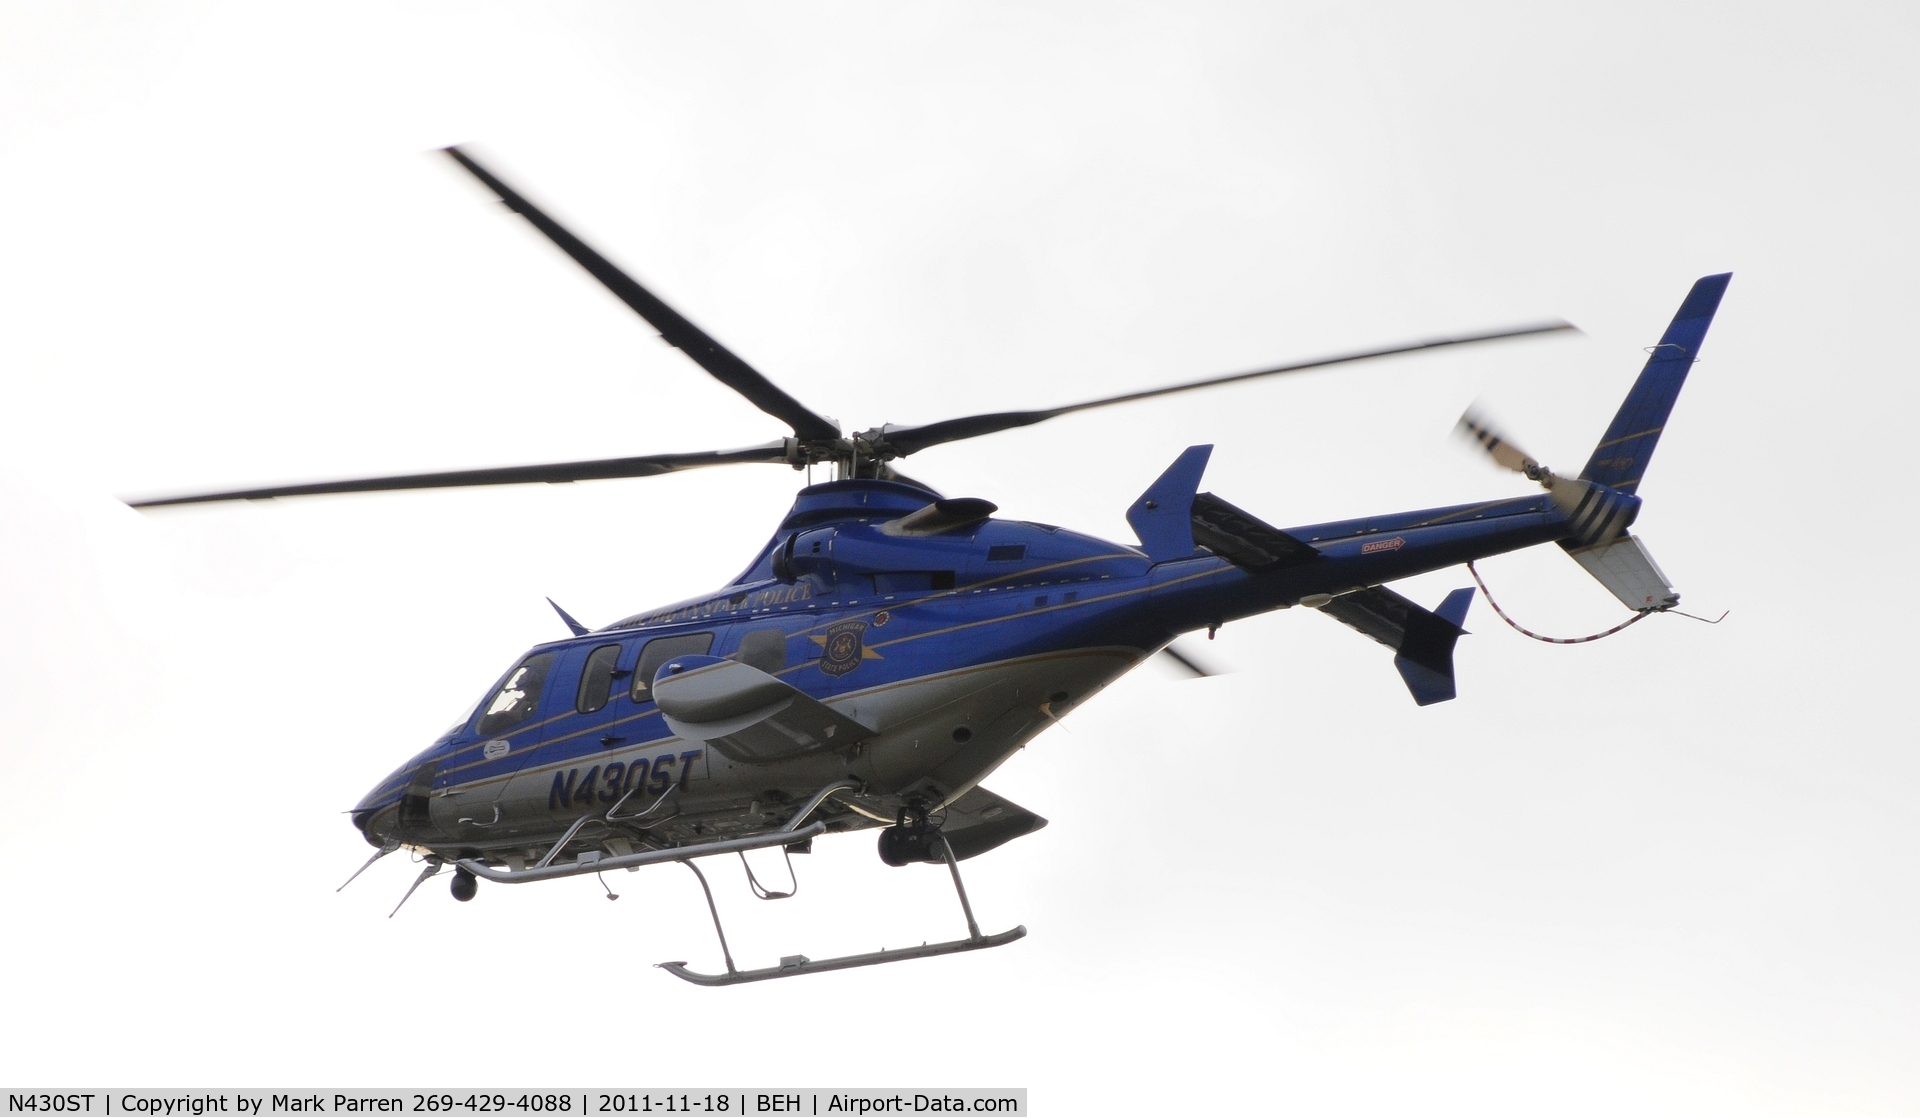 N430ST, 2000 Bell 430 C/N 49071, Search for body in St Joseph River, from Lakeland Hospital SJ to Lake Michigan.